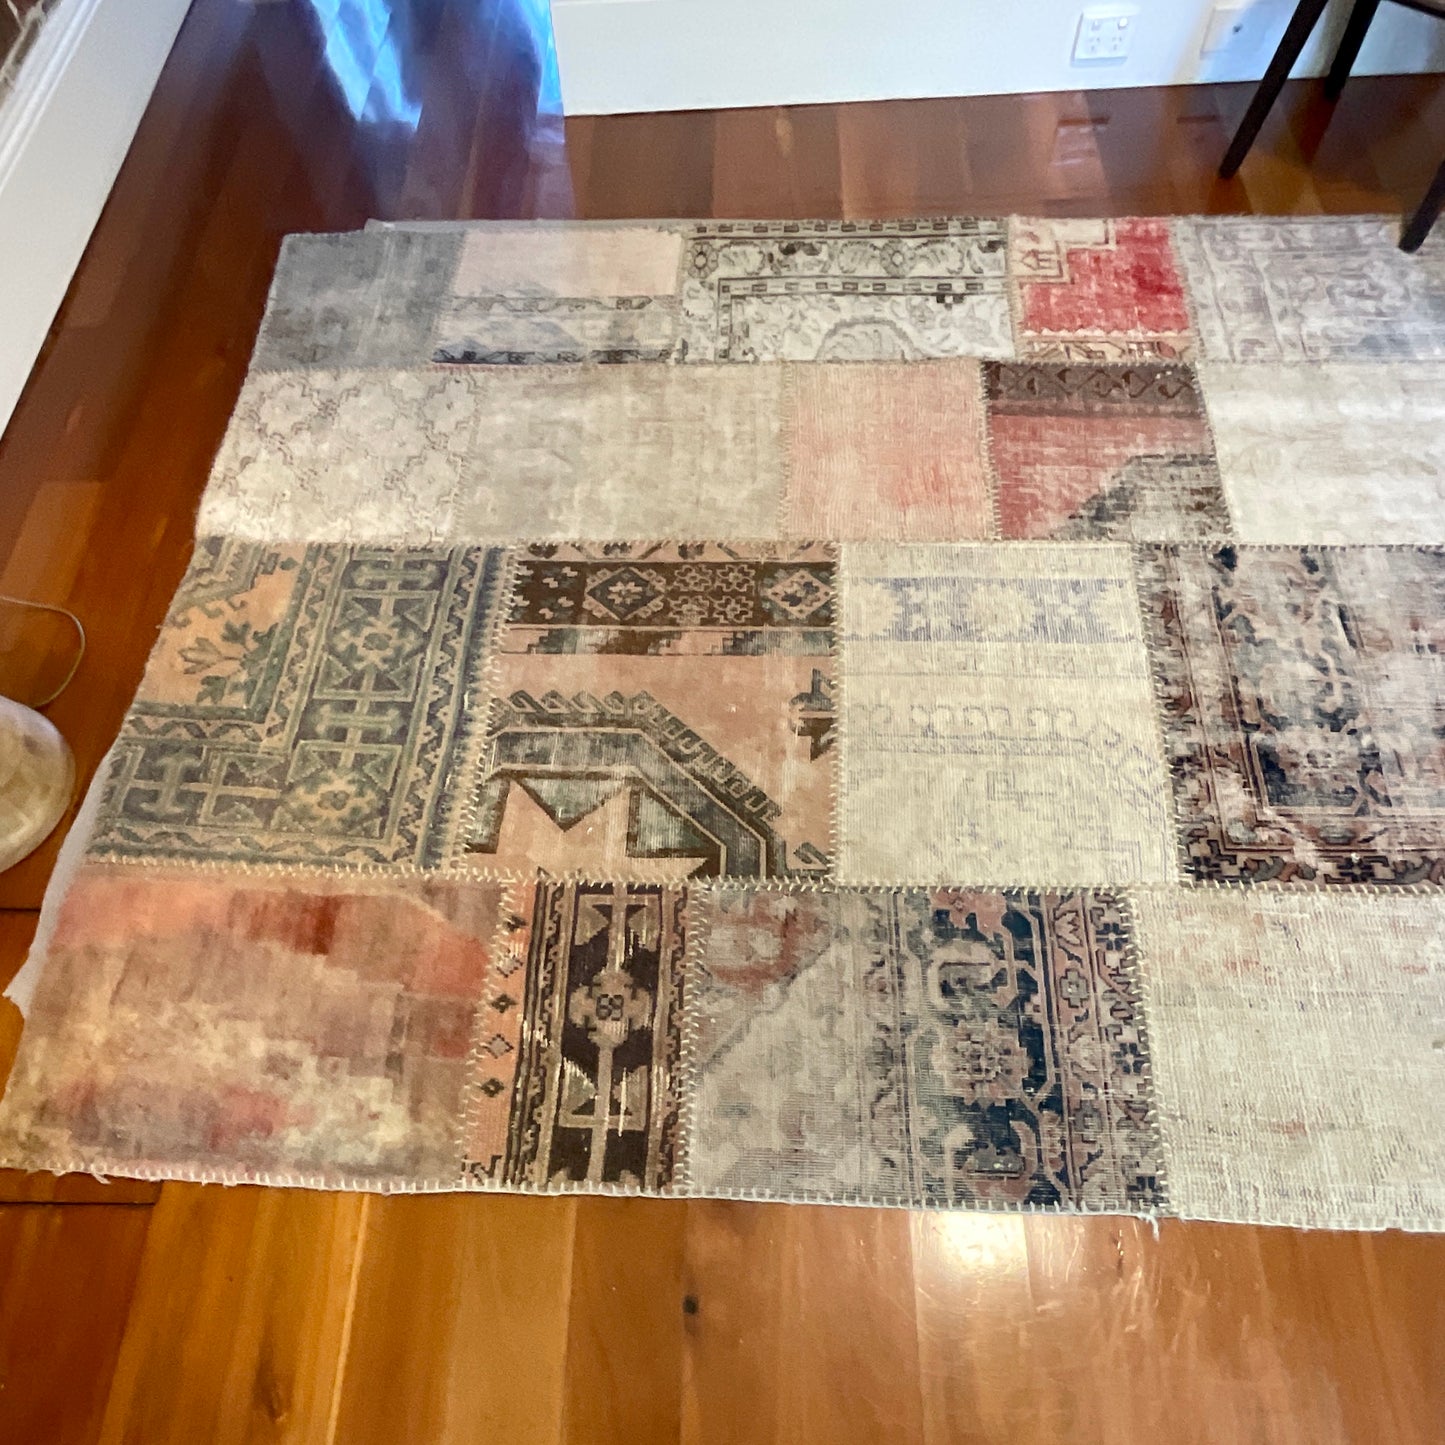 Vintage Patchwork Area Rug by Cadrys